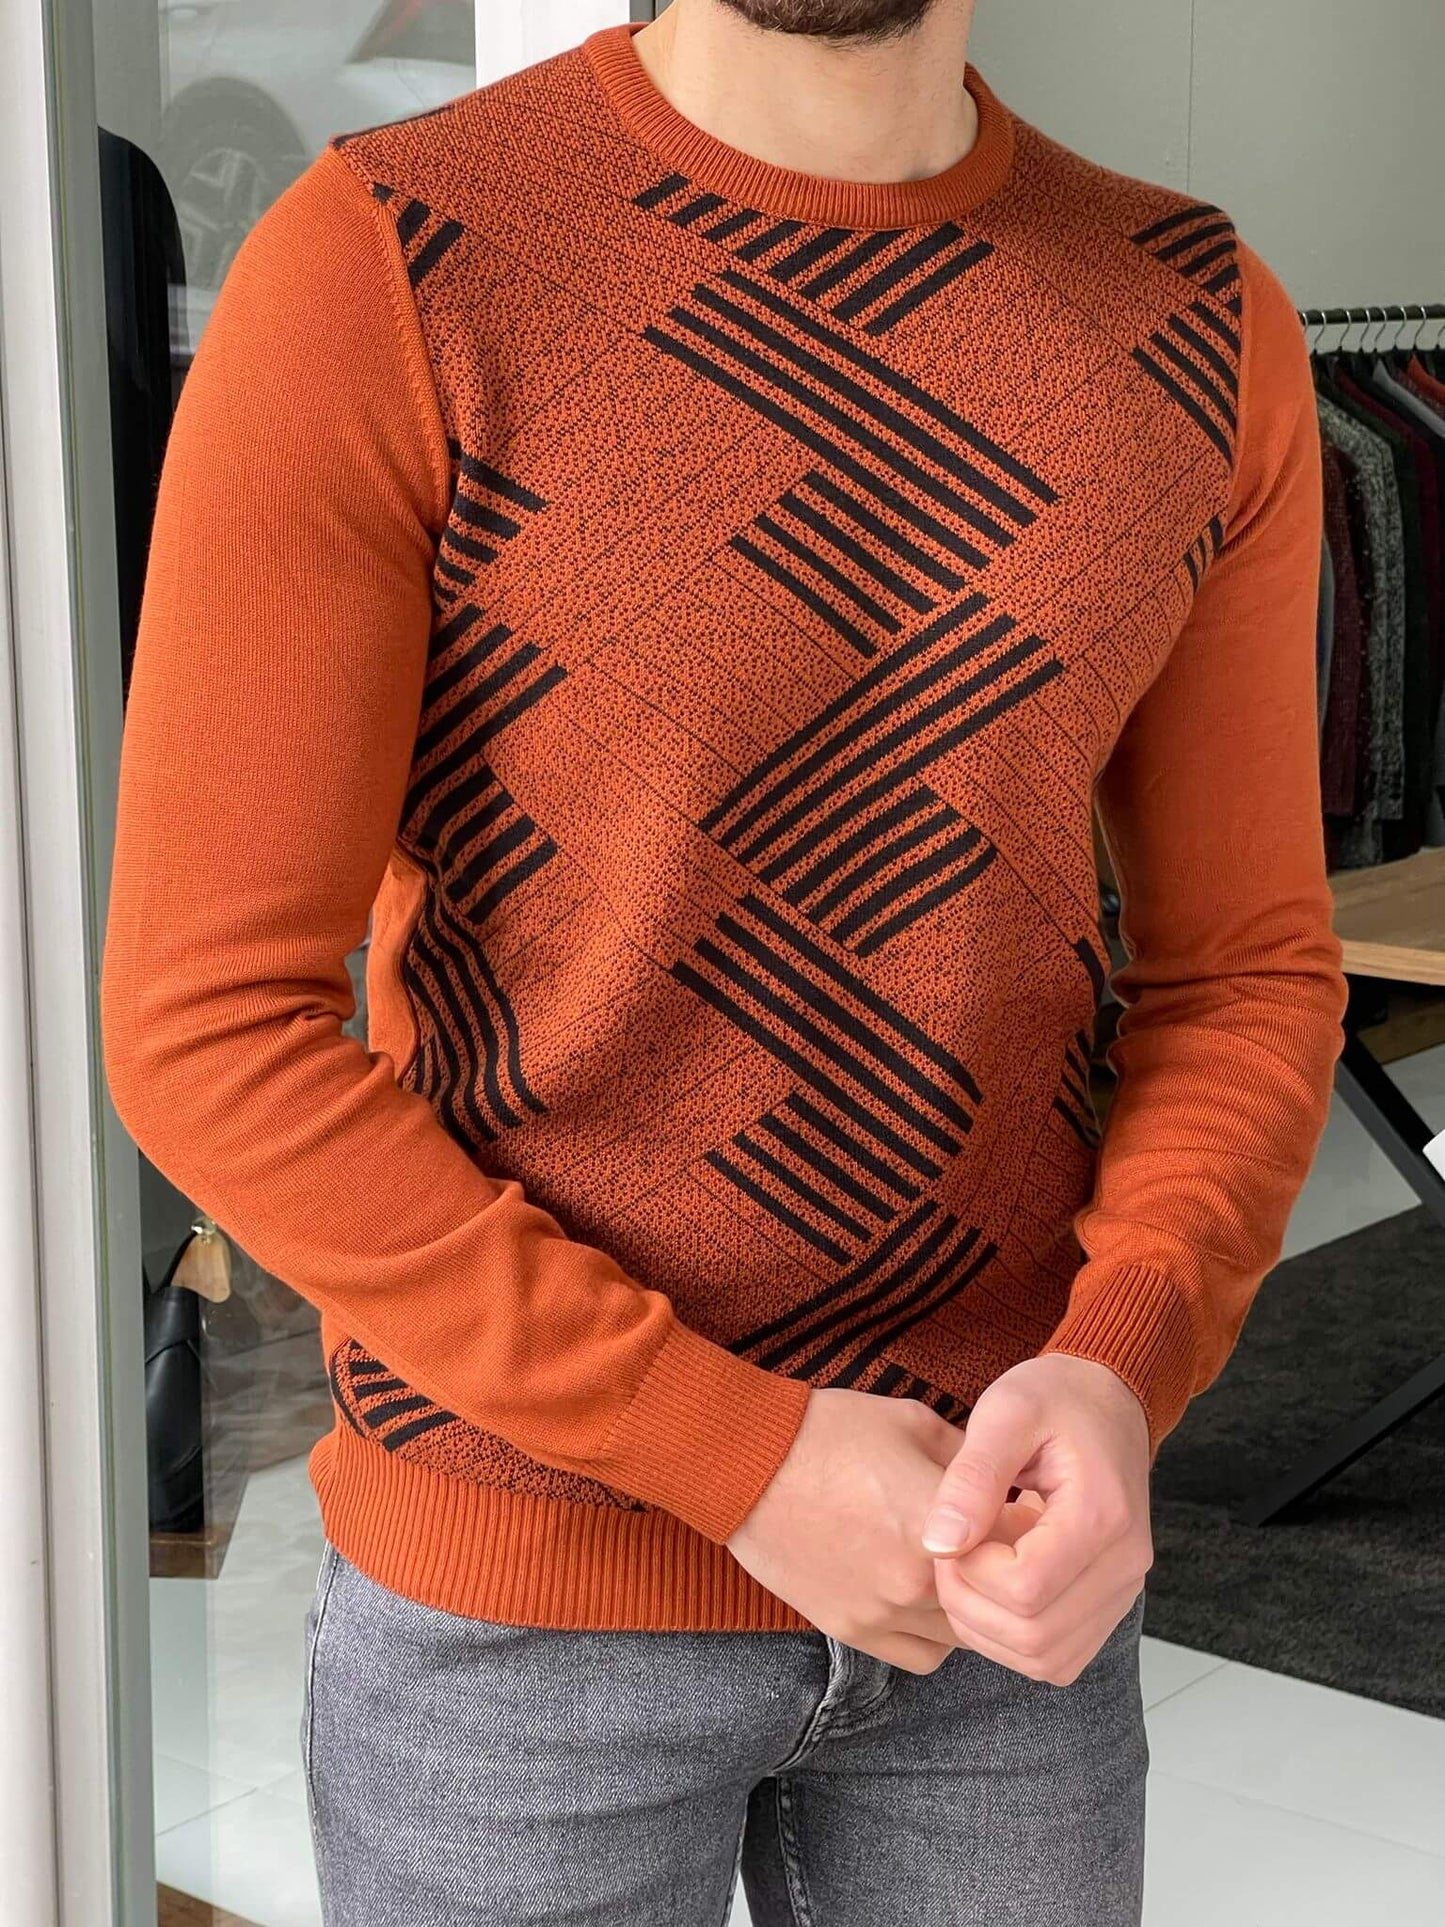 A crewneck sweater with a striking patterned tile design, combining vibrant colors and geometric shapes."